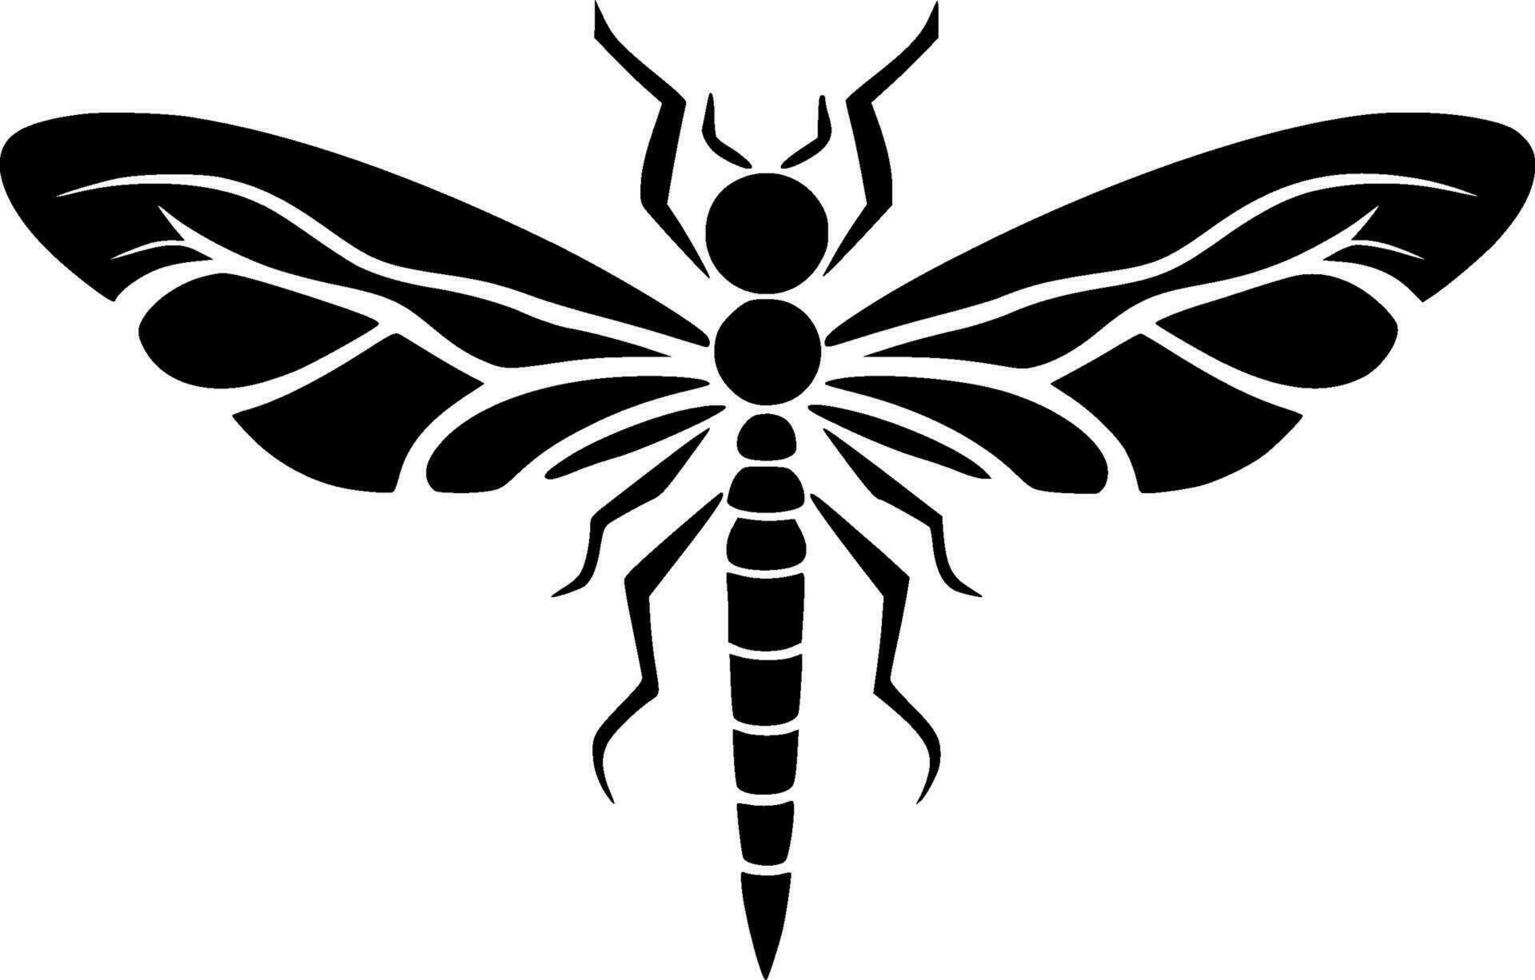 Dragonfly - High Quality Vector Logo - Vector illustration ideal for T-shirt graphic